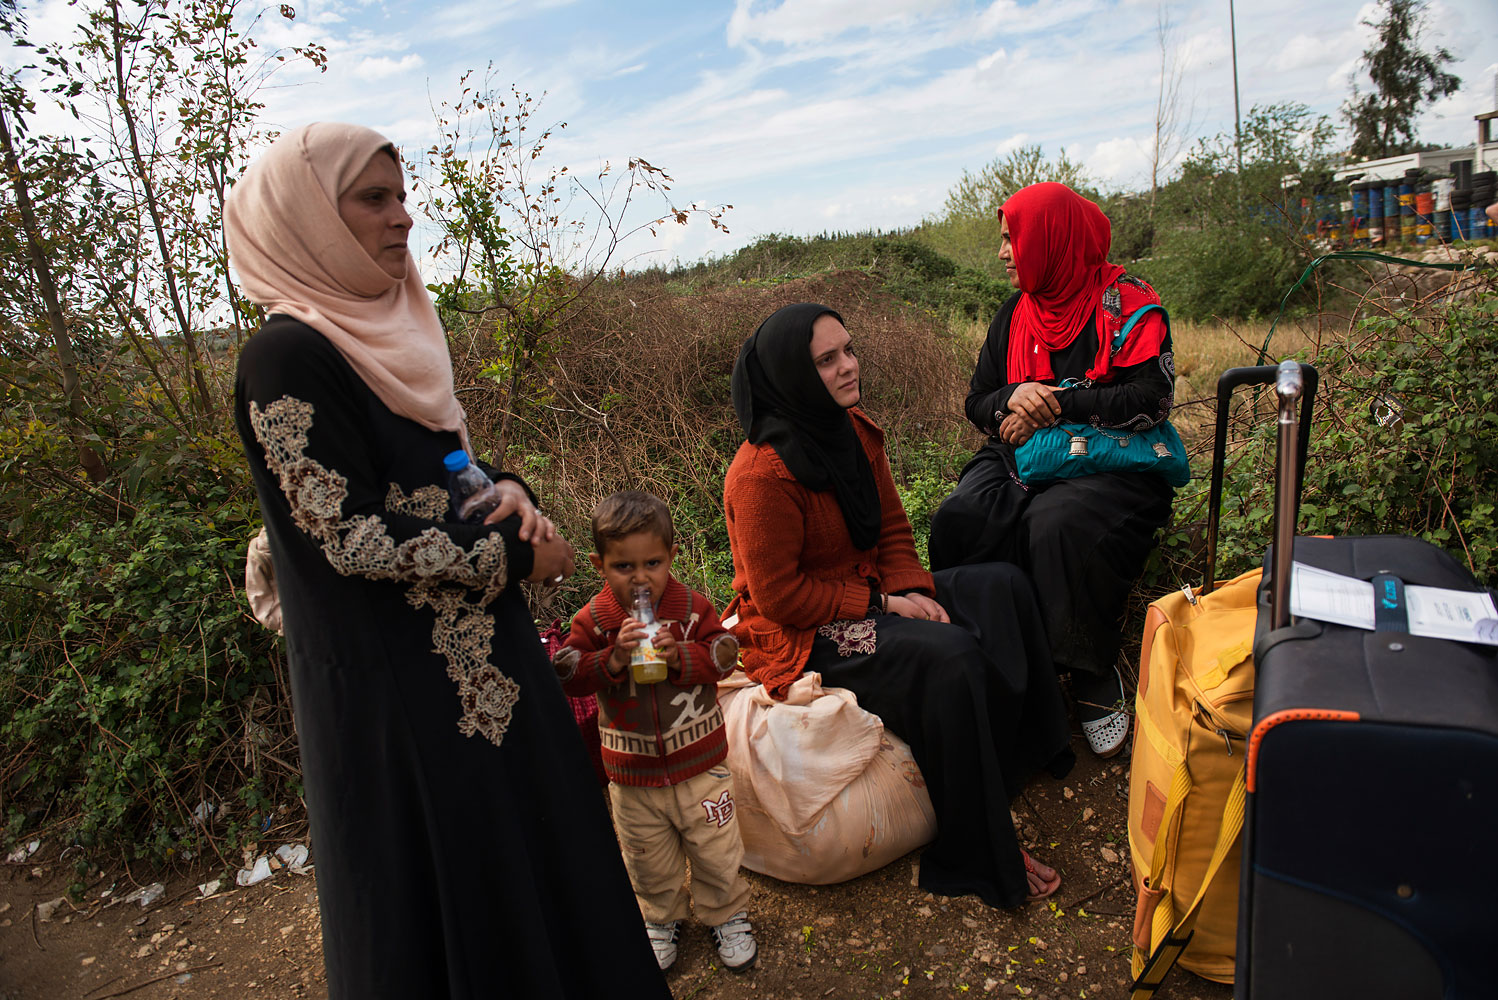 Amar and Masrine, their sister-in-law Nahlah and her son Mazen, wait to cross the border in the Lebanese town of Aboudiyeh. Their bags are all they have left. “What saddens me is not losing things, but losing people,” says Amar. “My other sister-in-law was shot a year-and-a-half ago.”